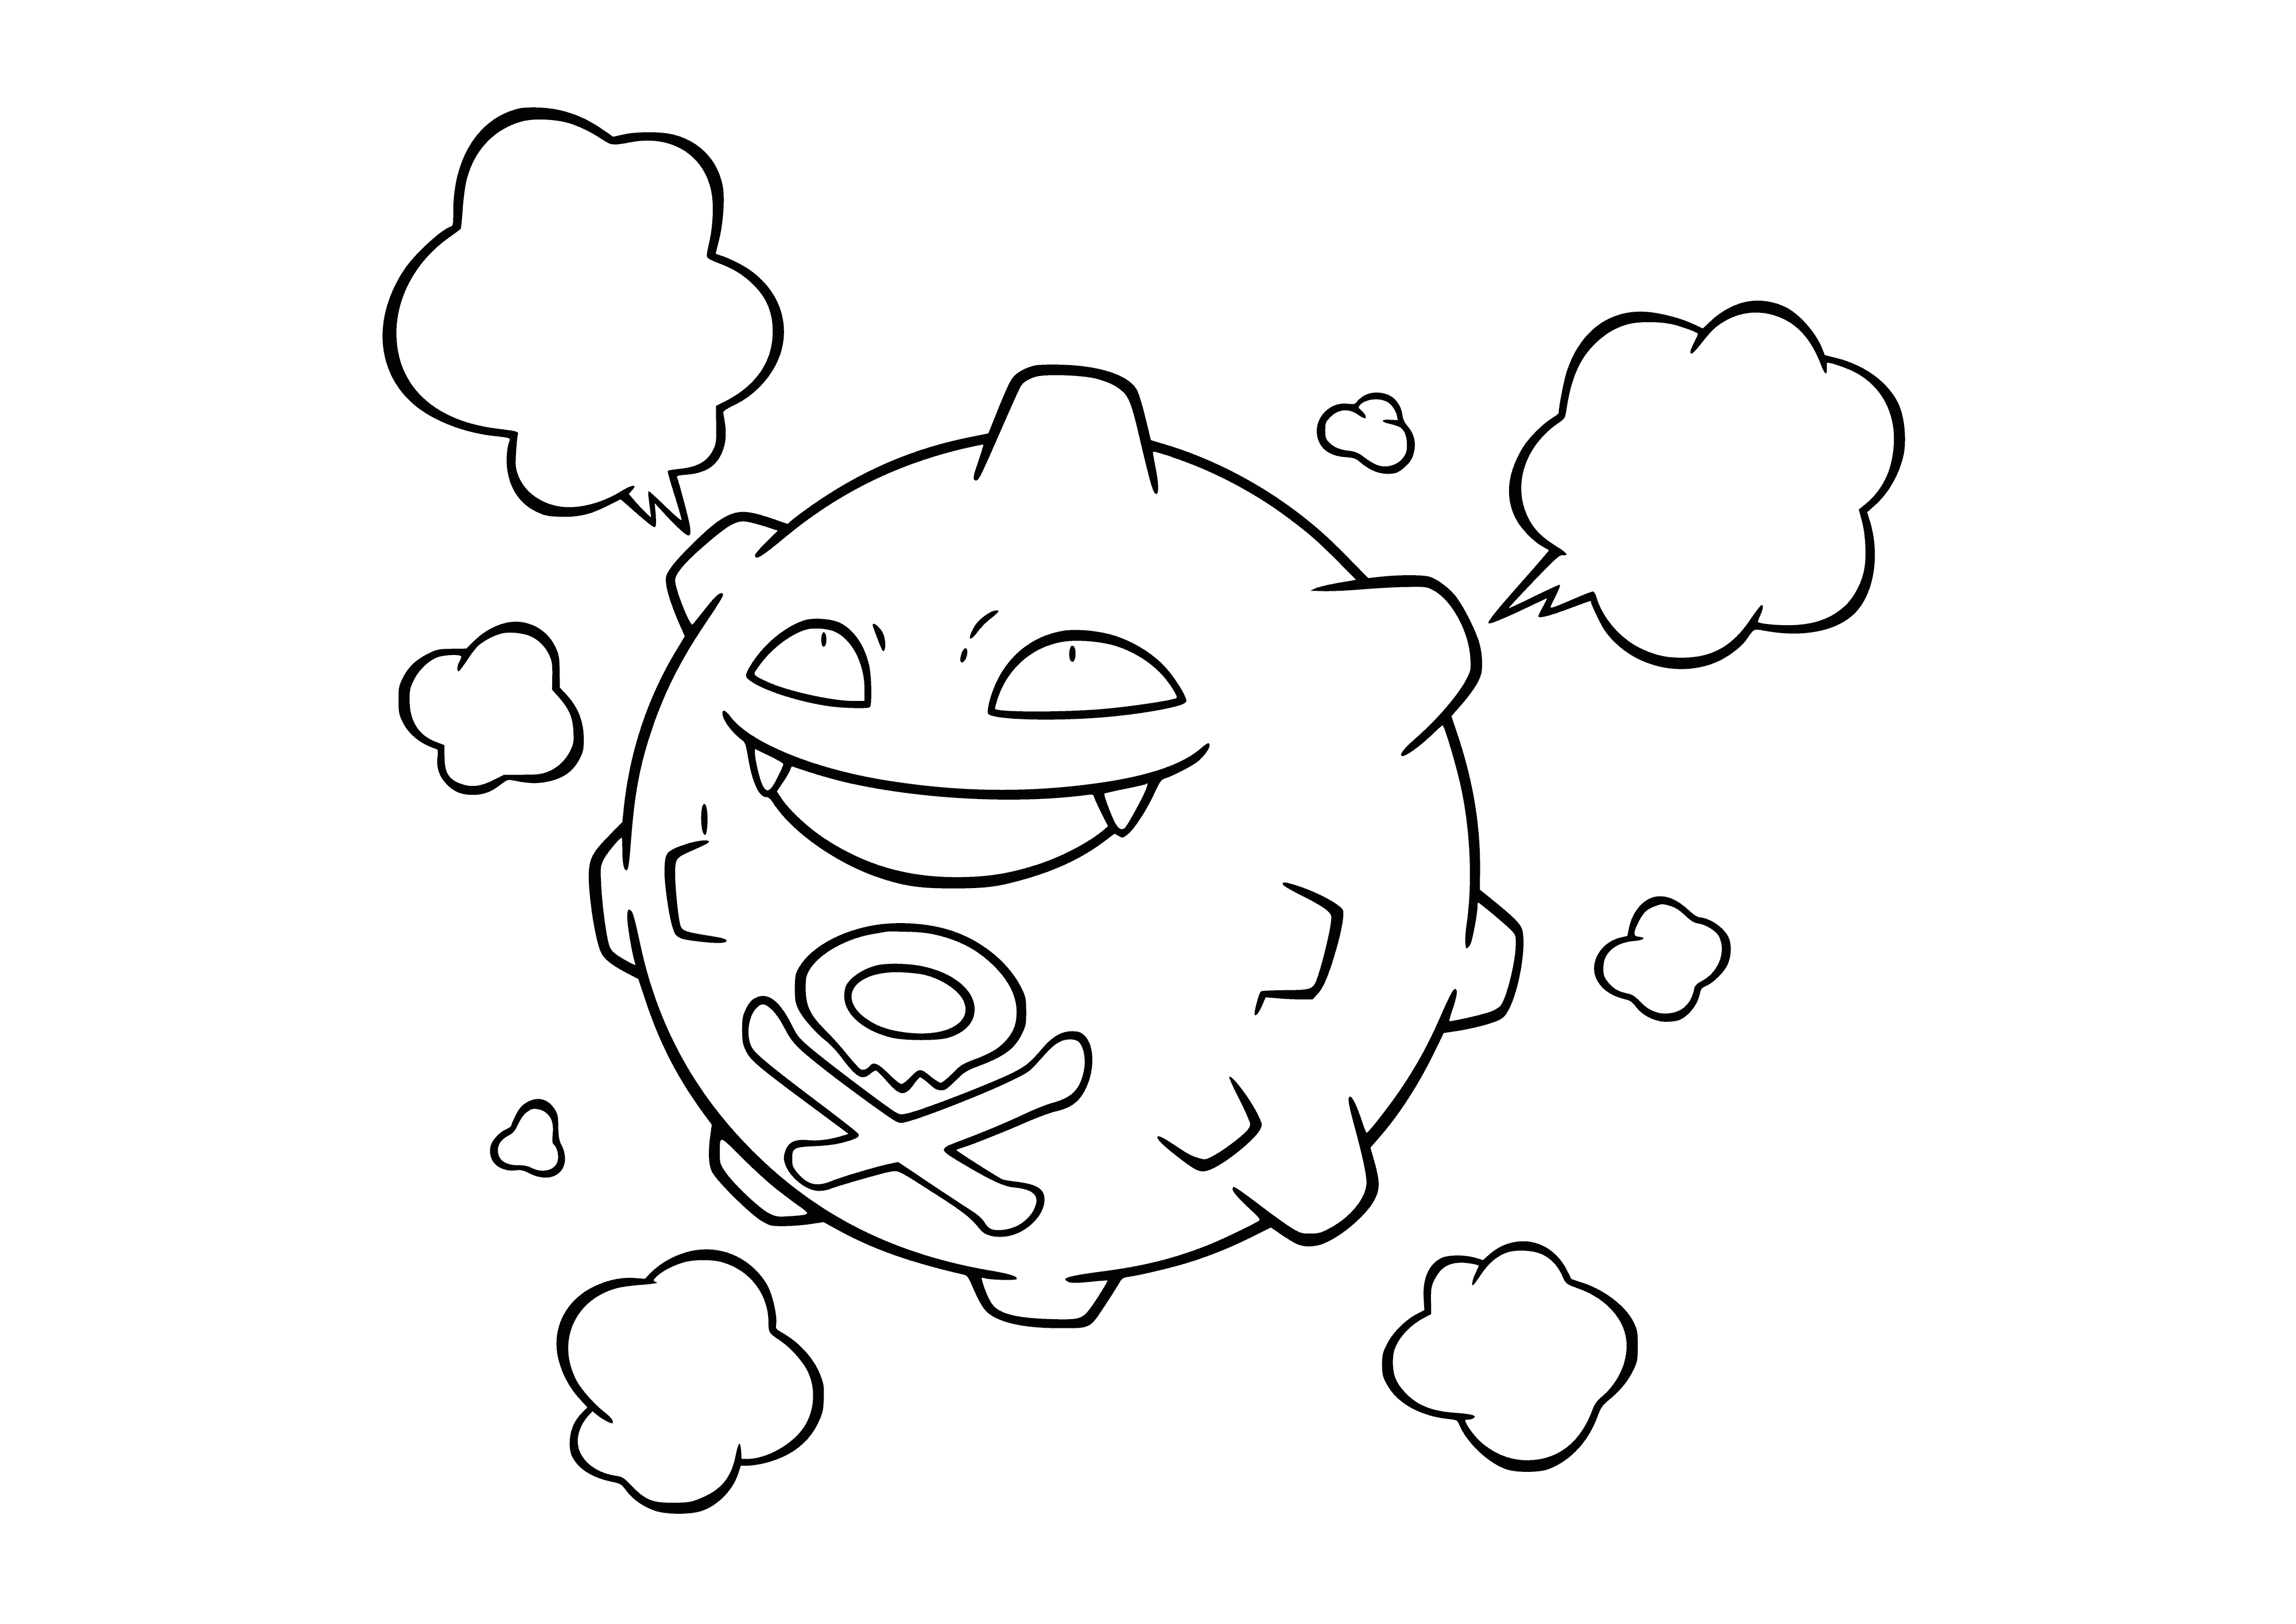 Pokemon Koffing (Koffing) coloring page